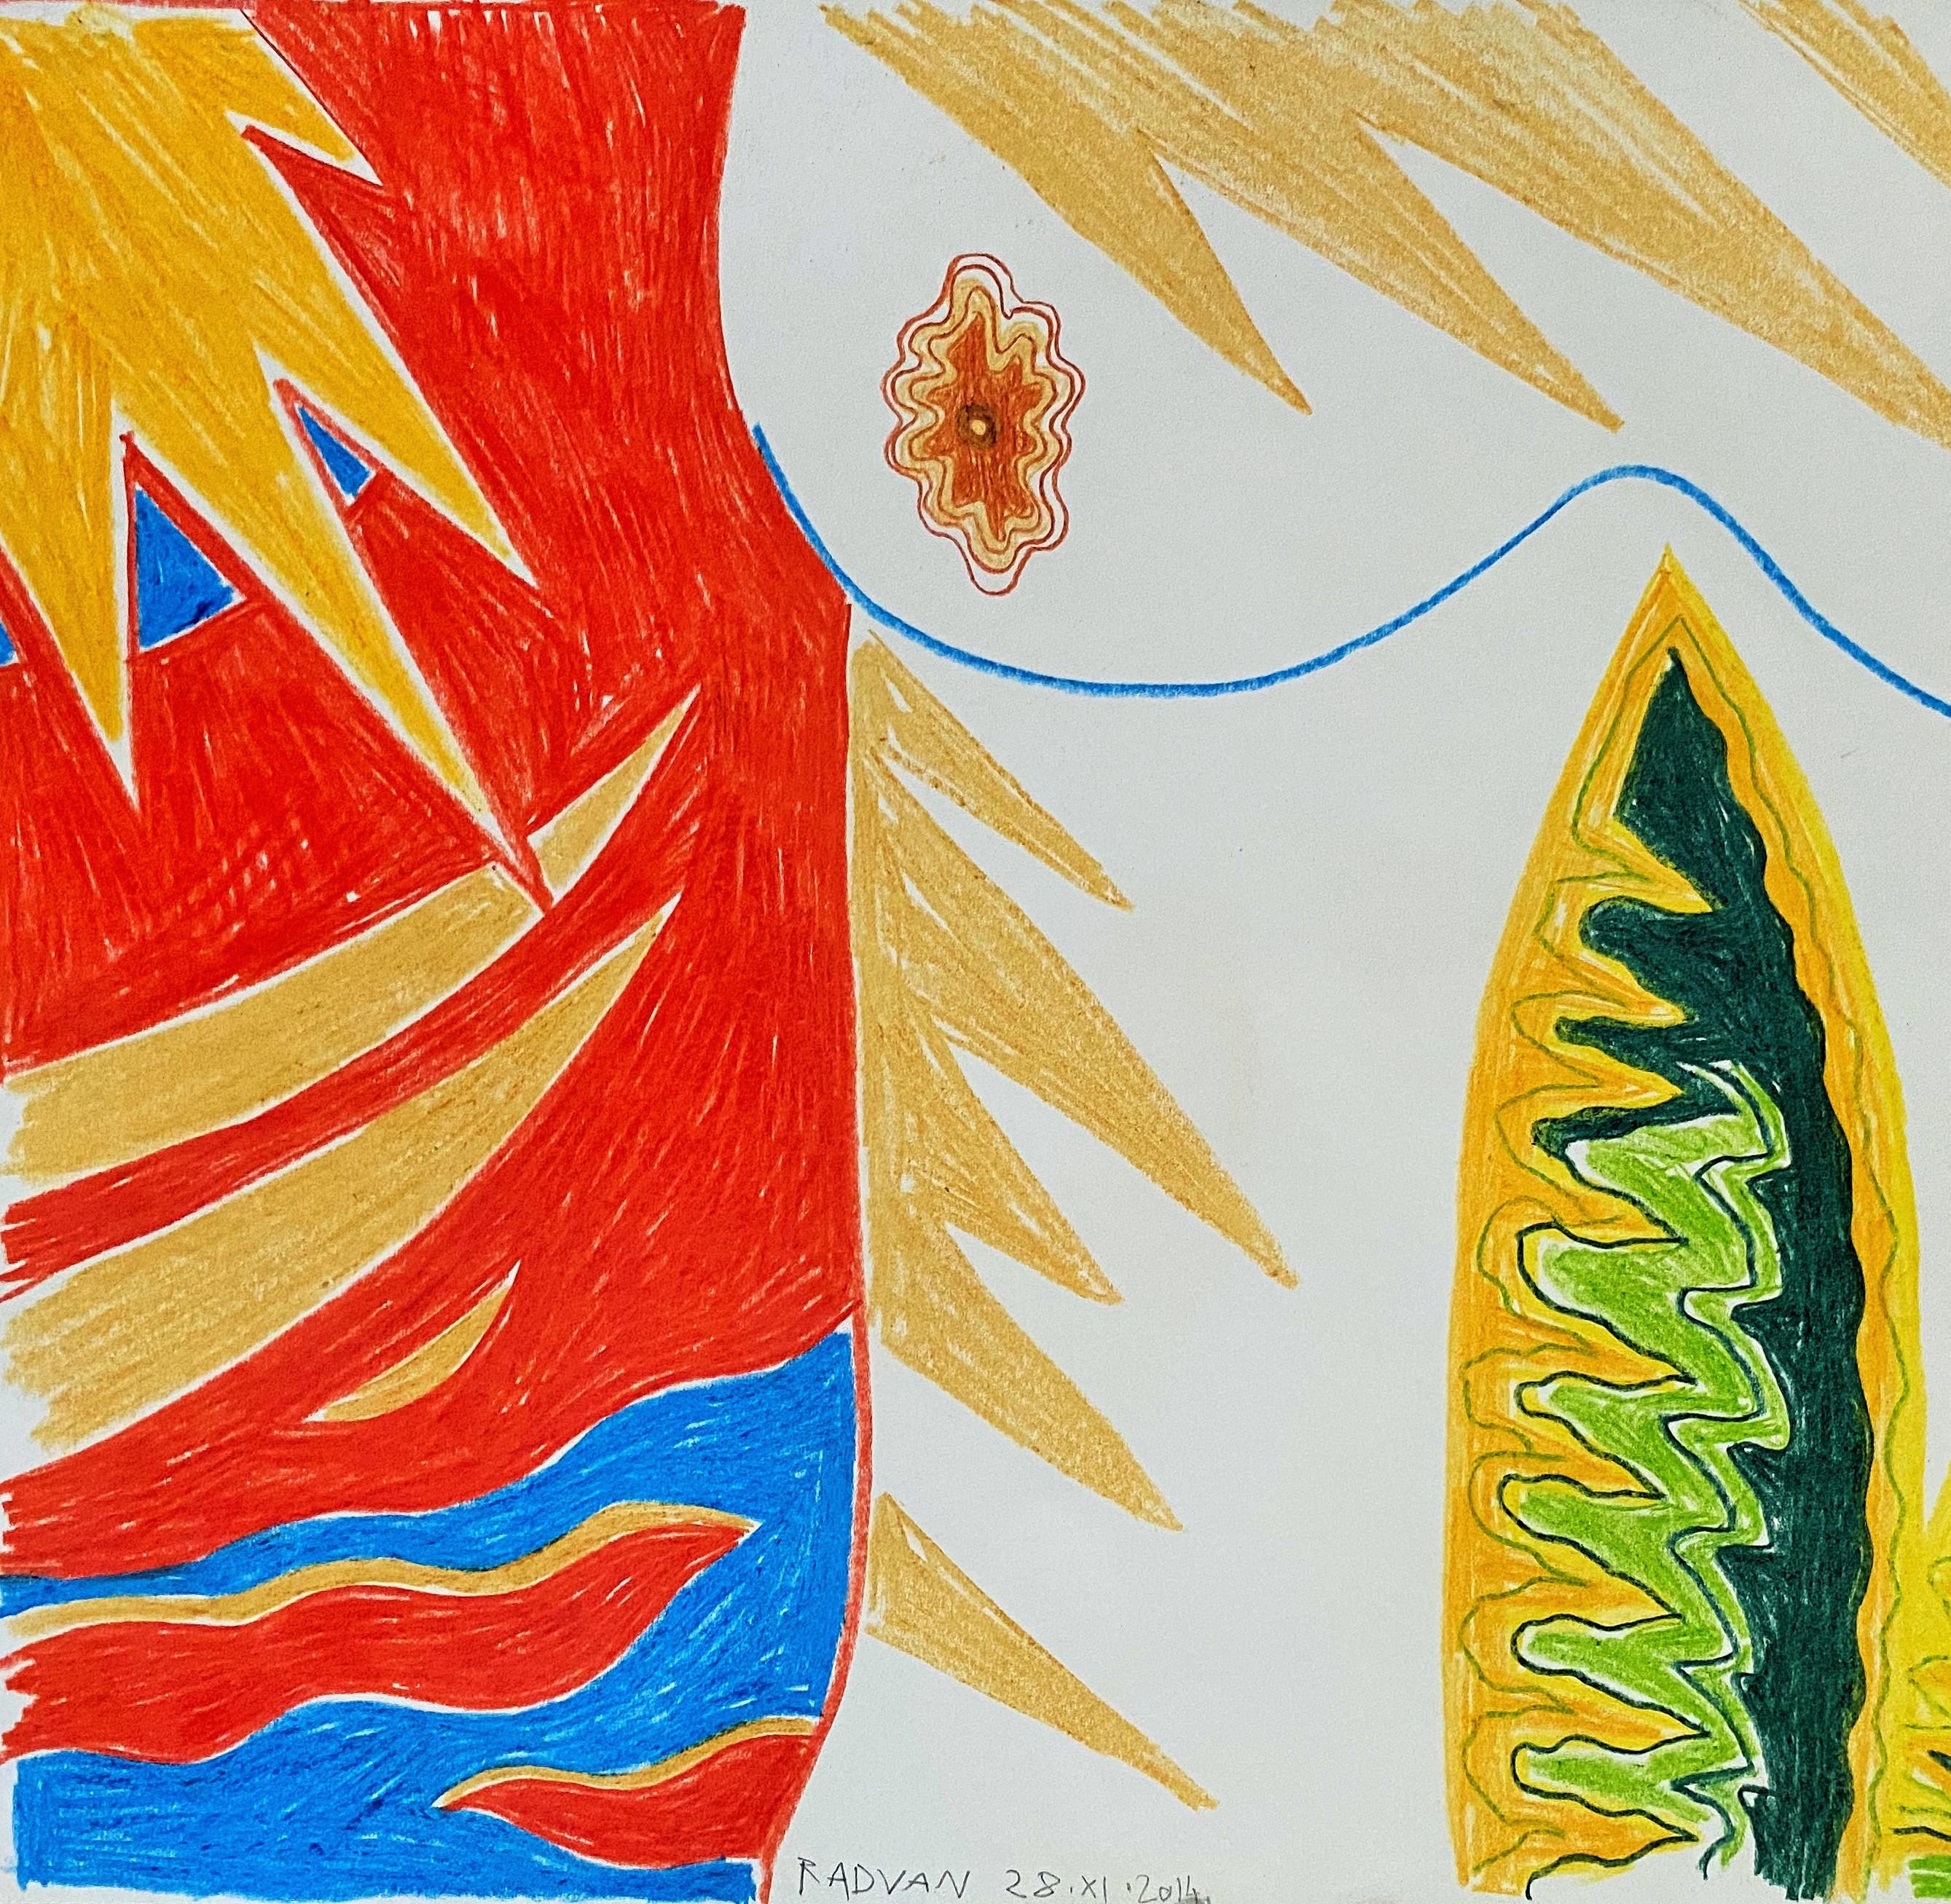 Island for Umberto 08, 2014
Color pencil on paper ( Signed and dated front left corner, framed)
11.6 H x 16.5 W in.
29.5 H x 42 W cm

